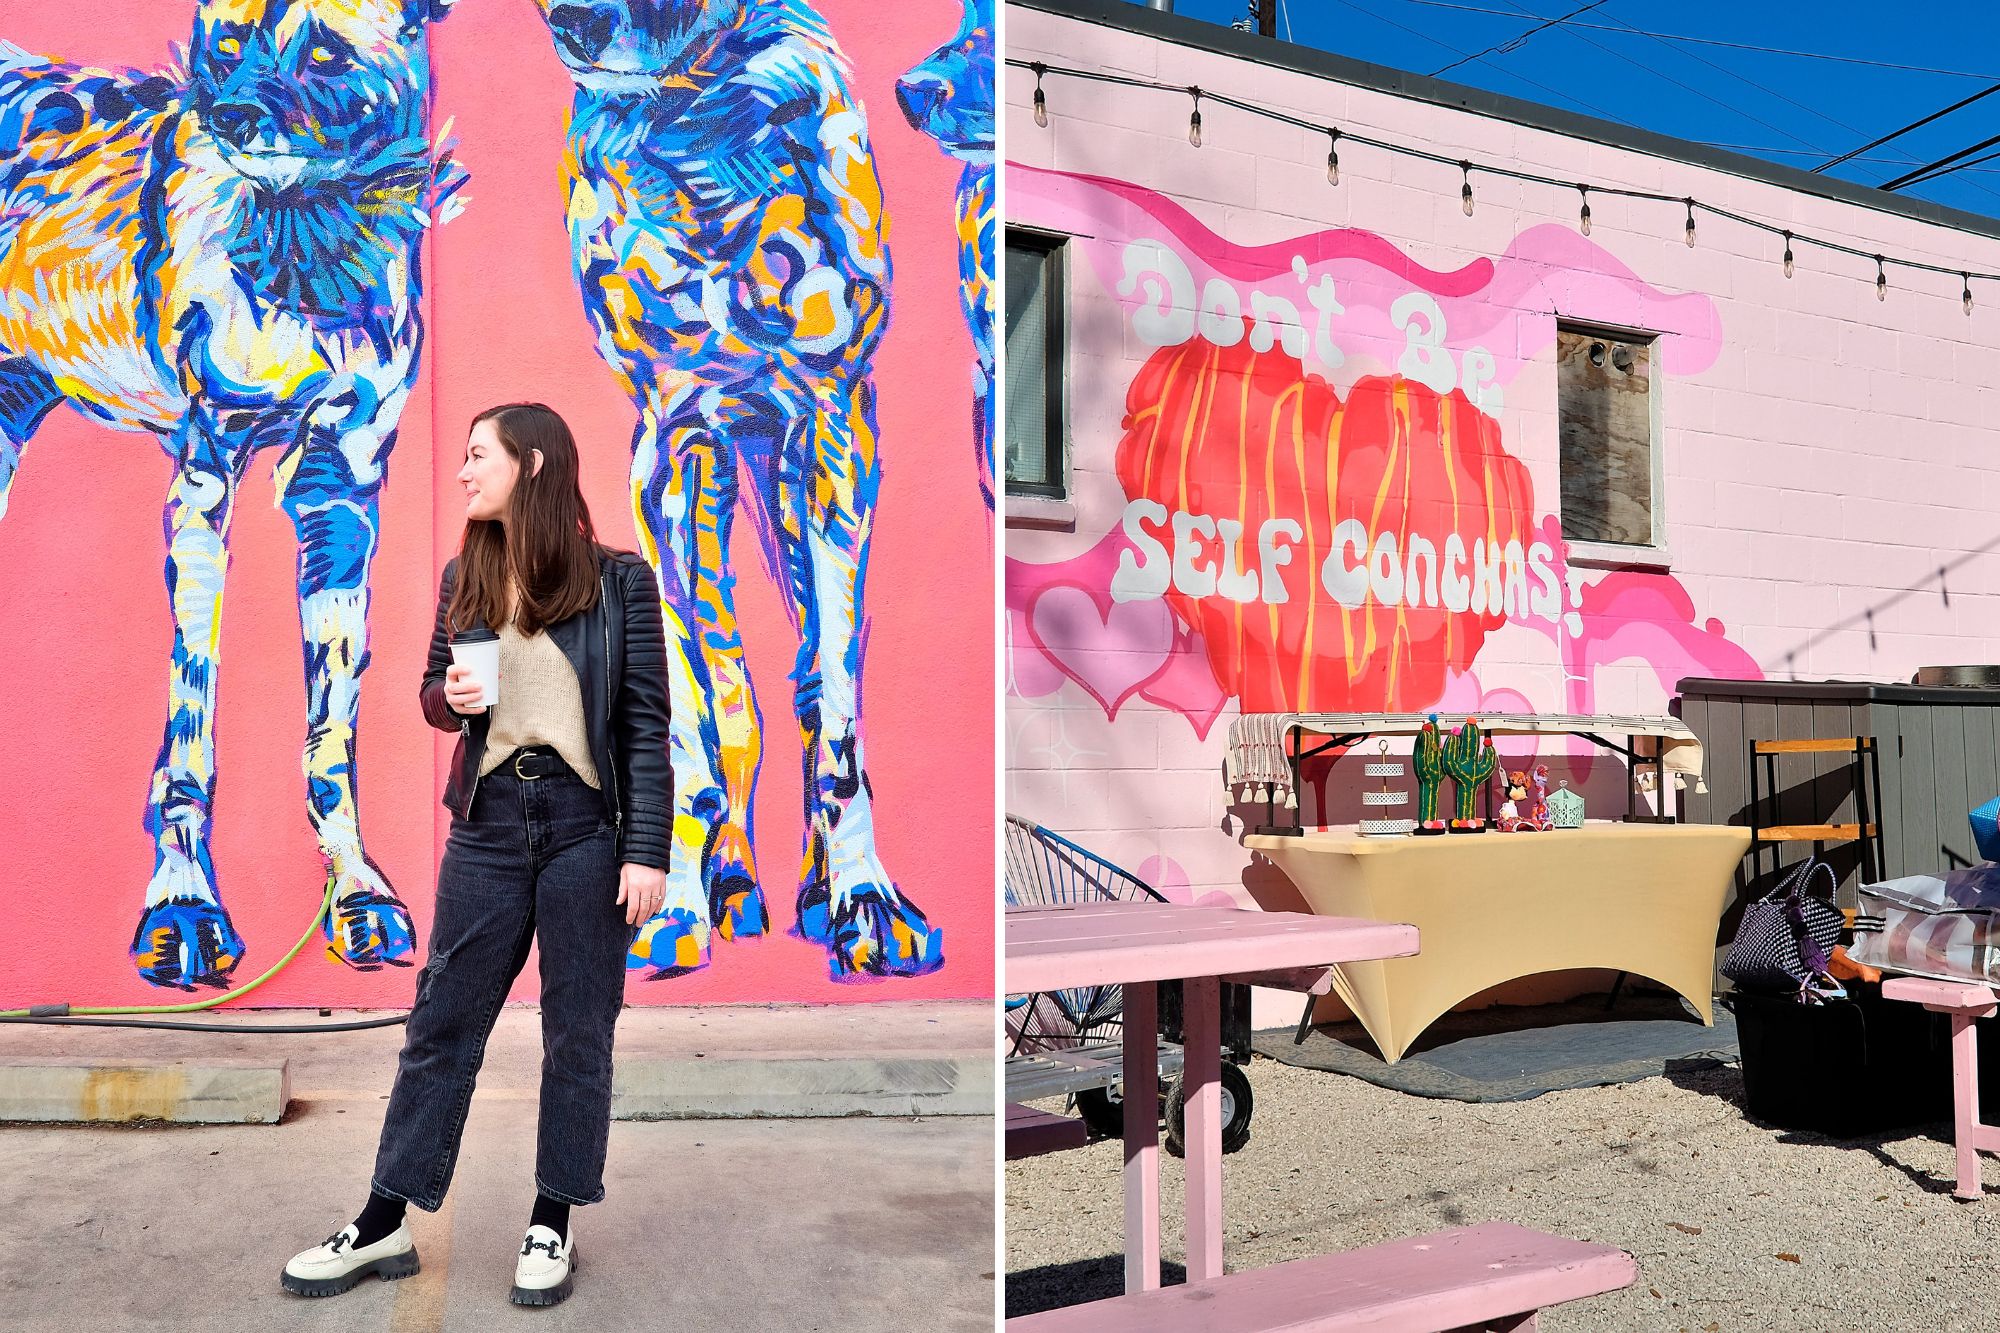 Two images: Alyssa in front of a mural with xolo dogs, and a mural that reads "don't be self conchas"